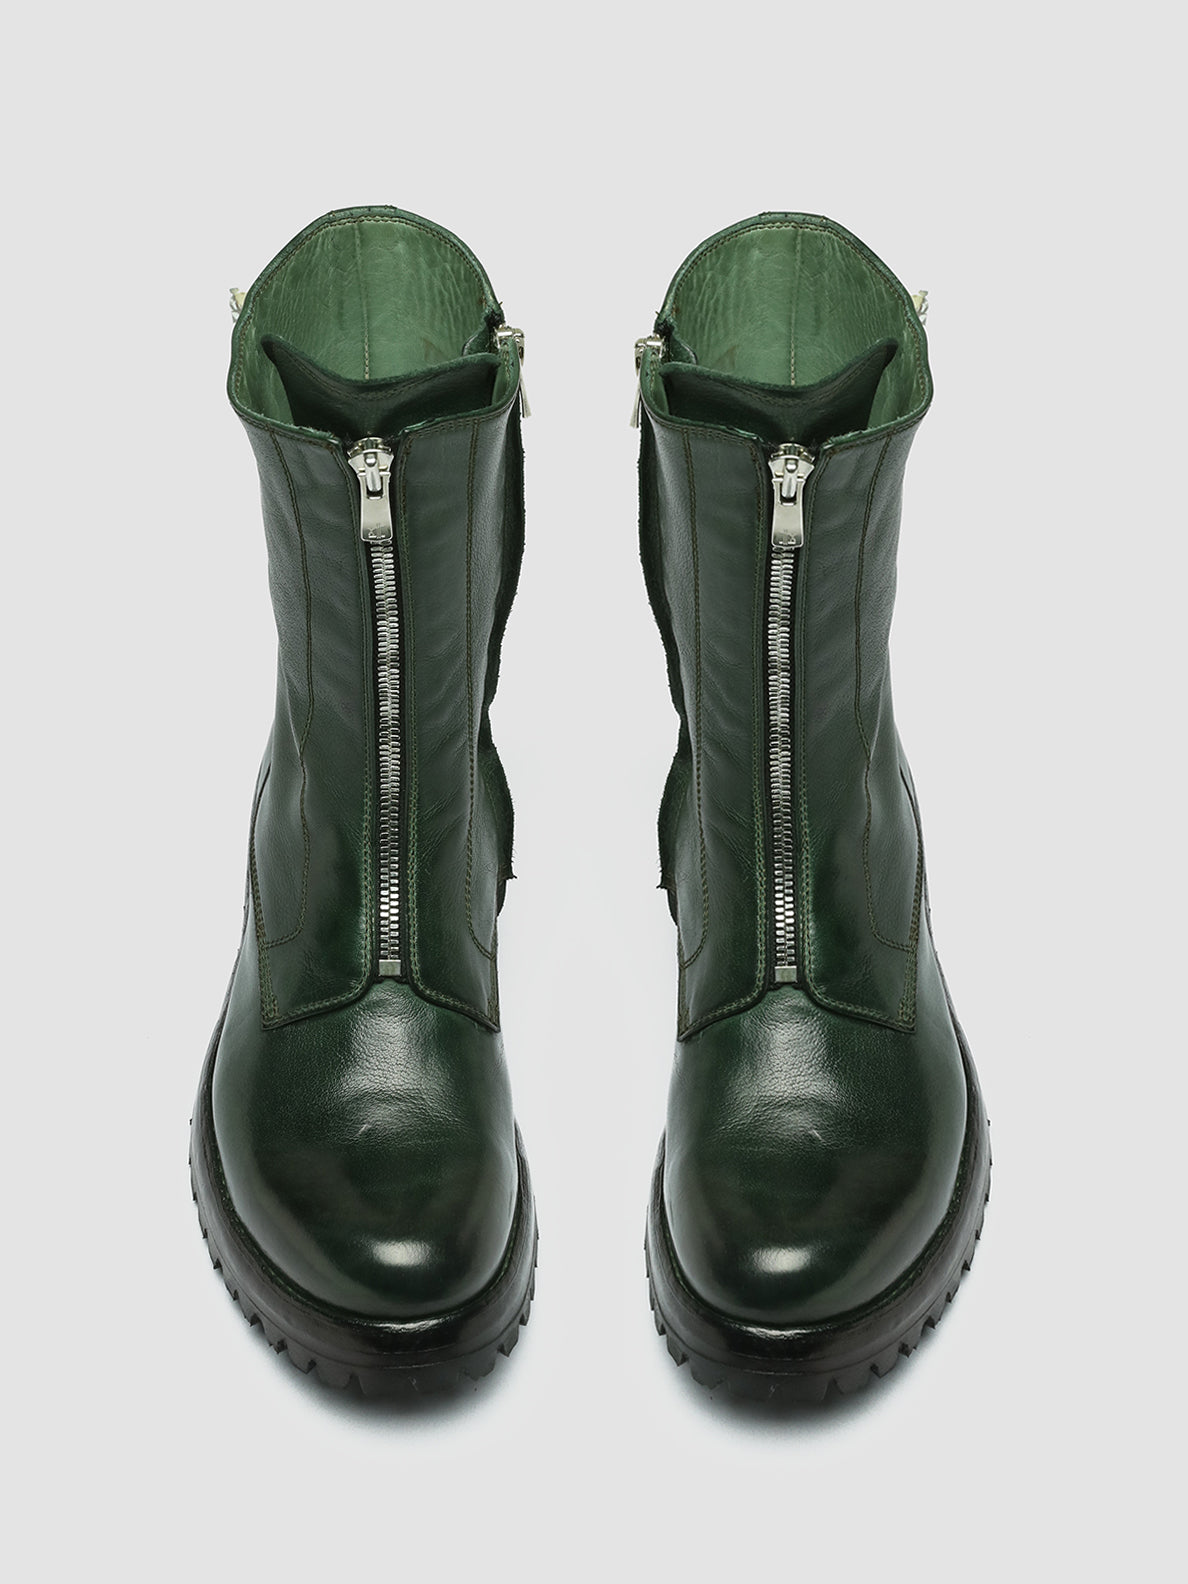 Womens Green Leather Boots LORAINE 015